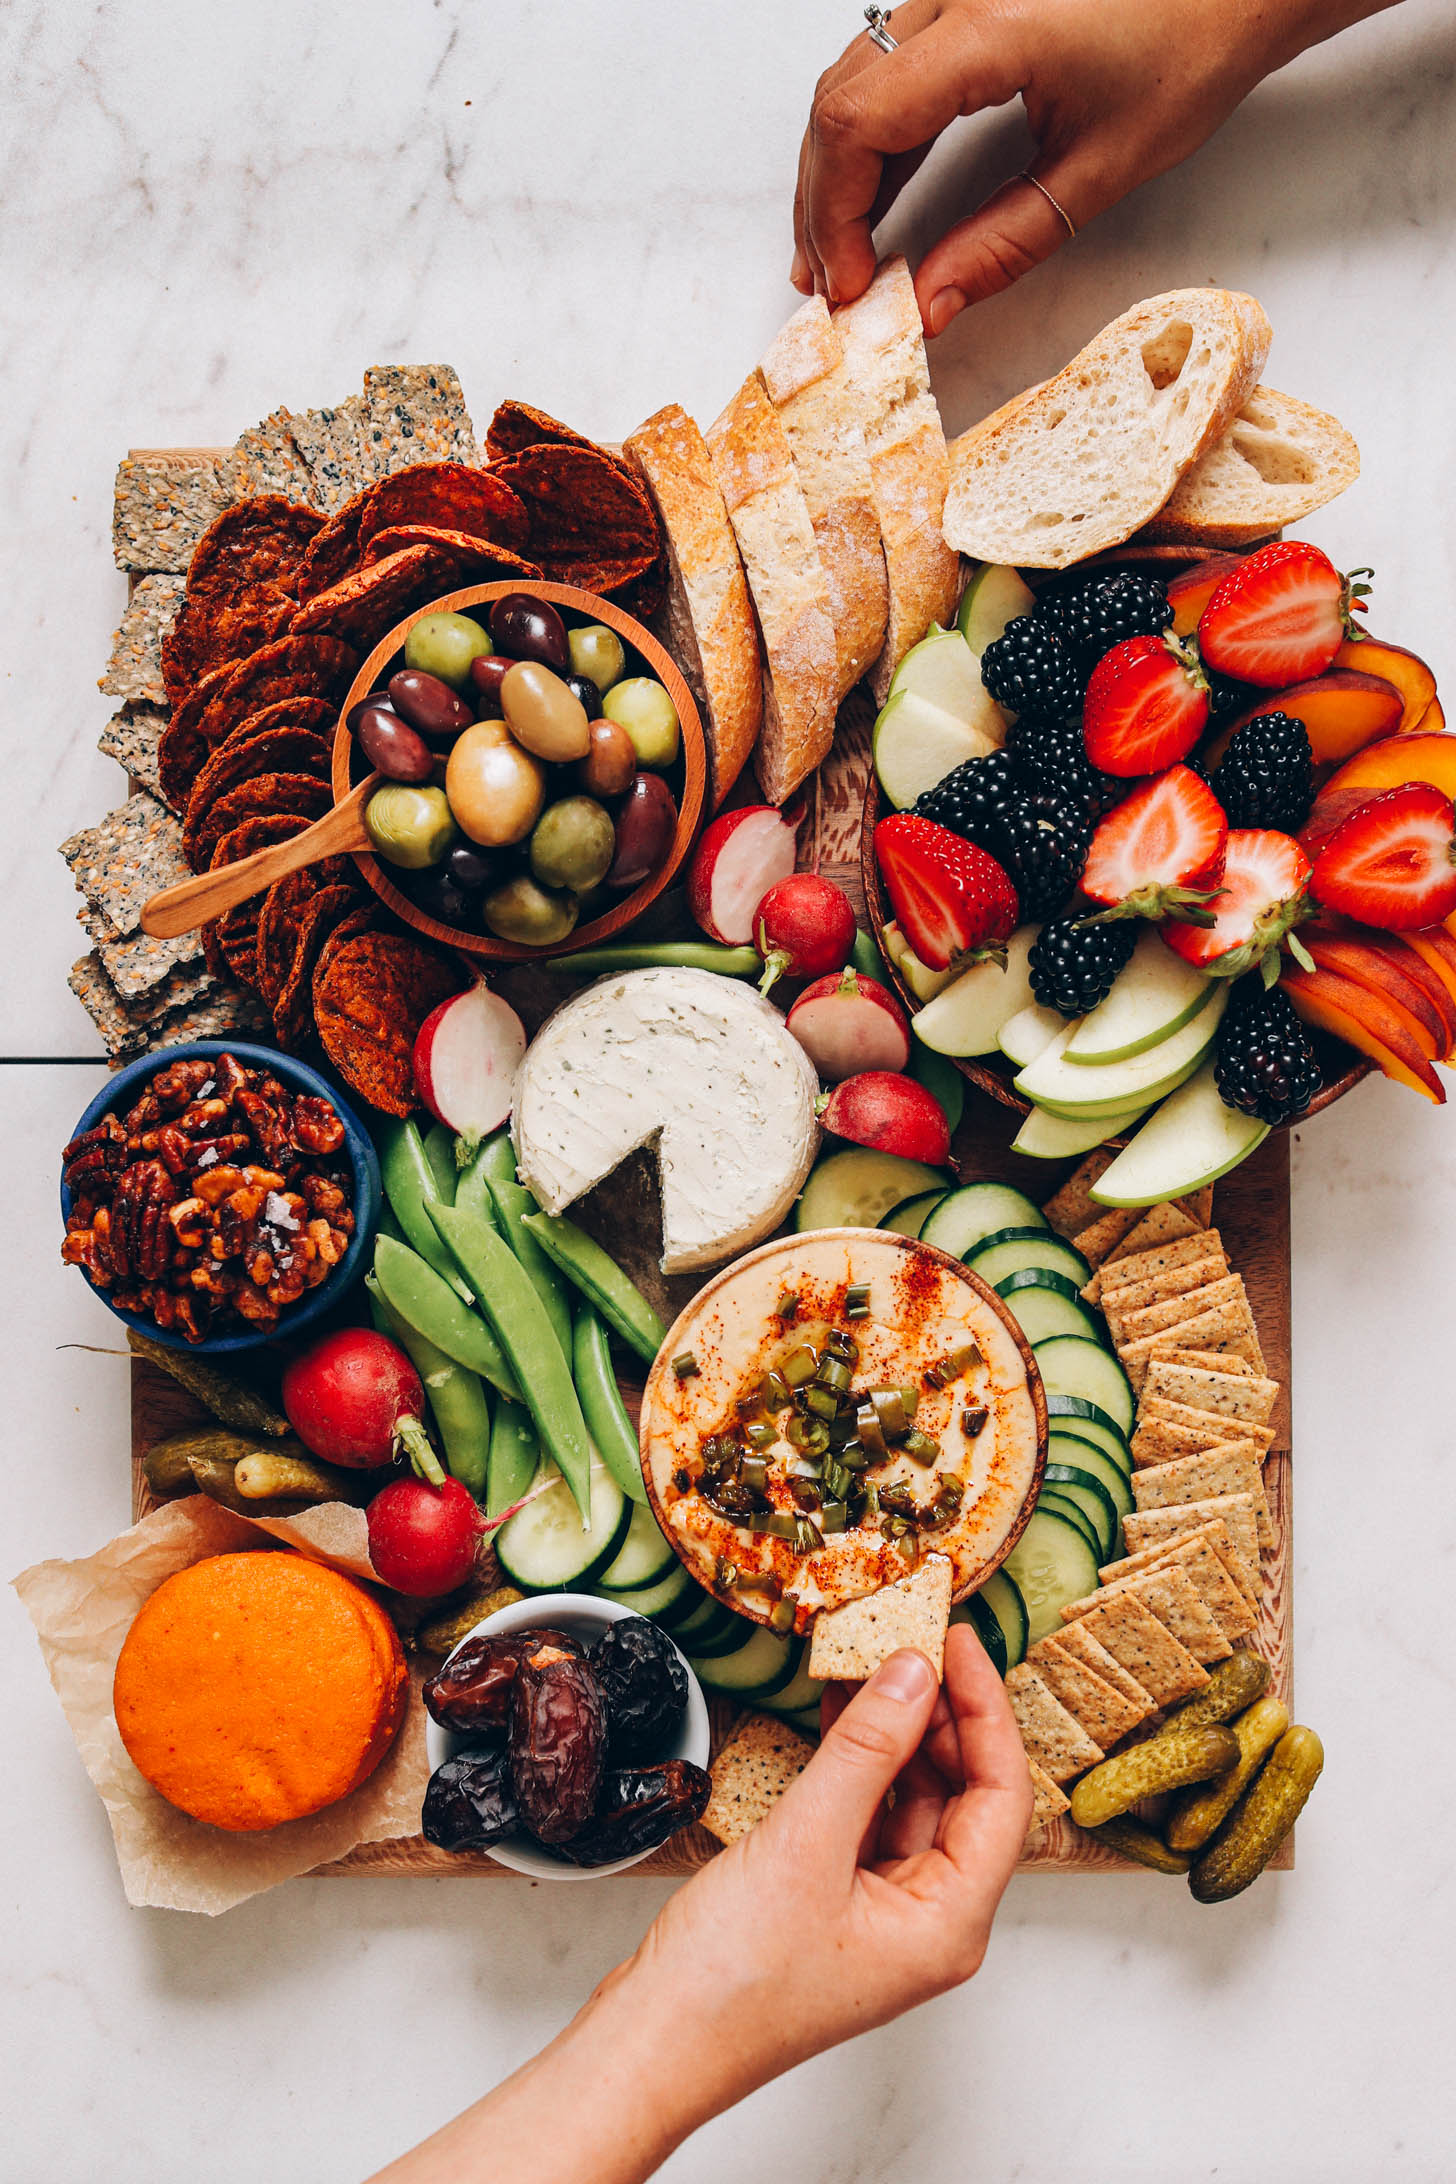 Hands reaching to grab snacks from a vegan charcuterie board